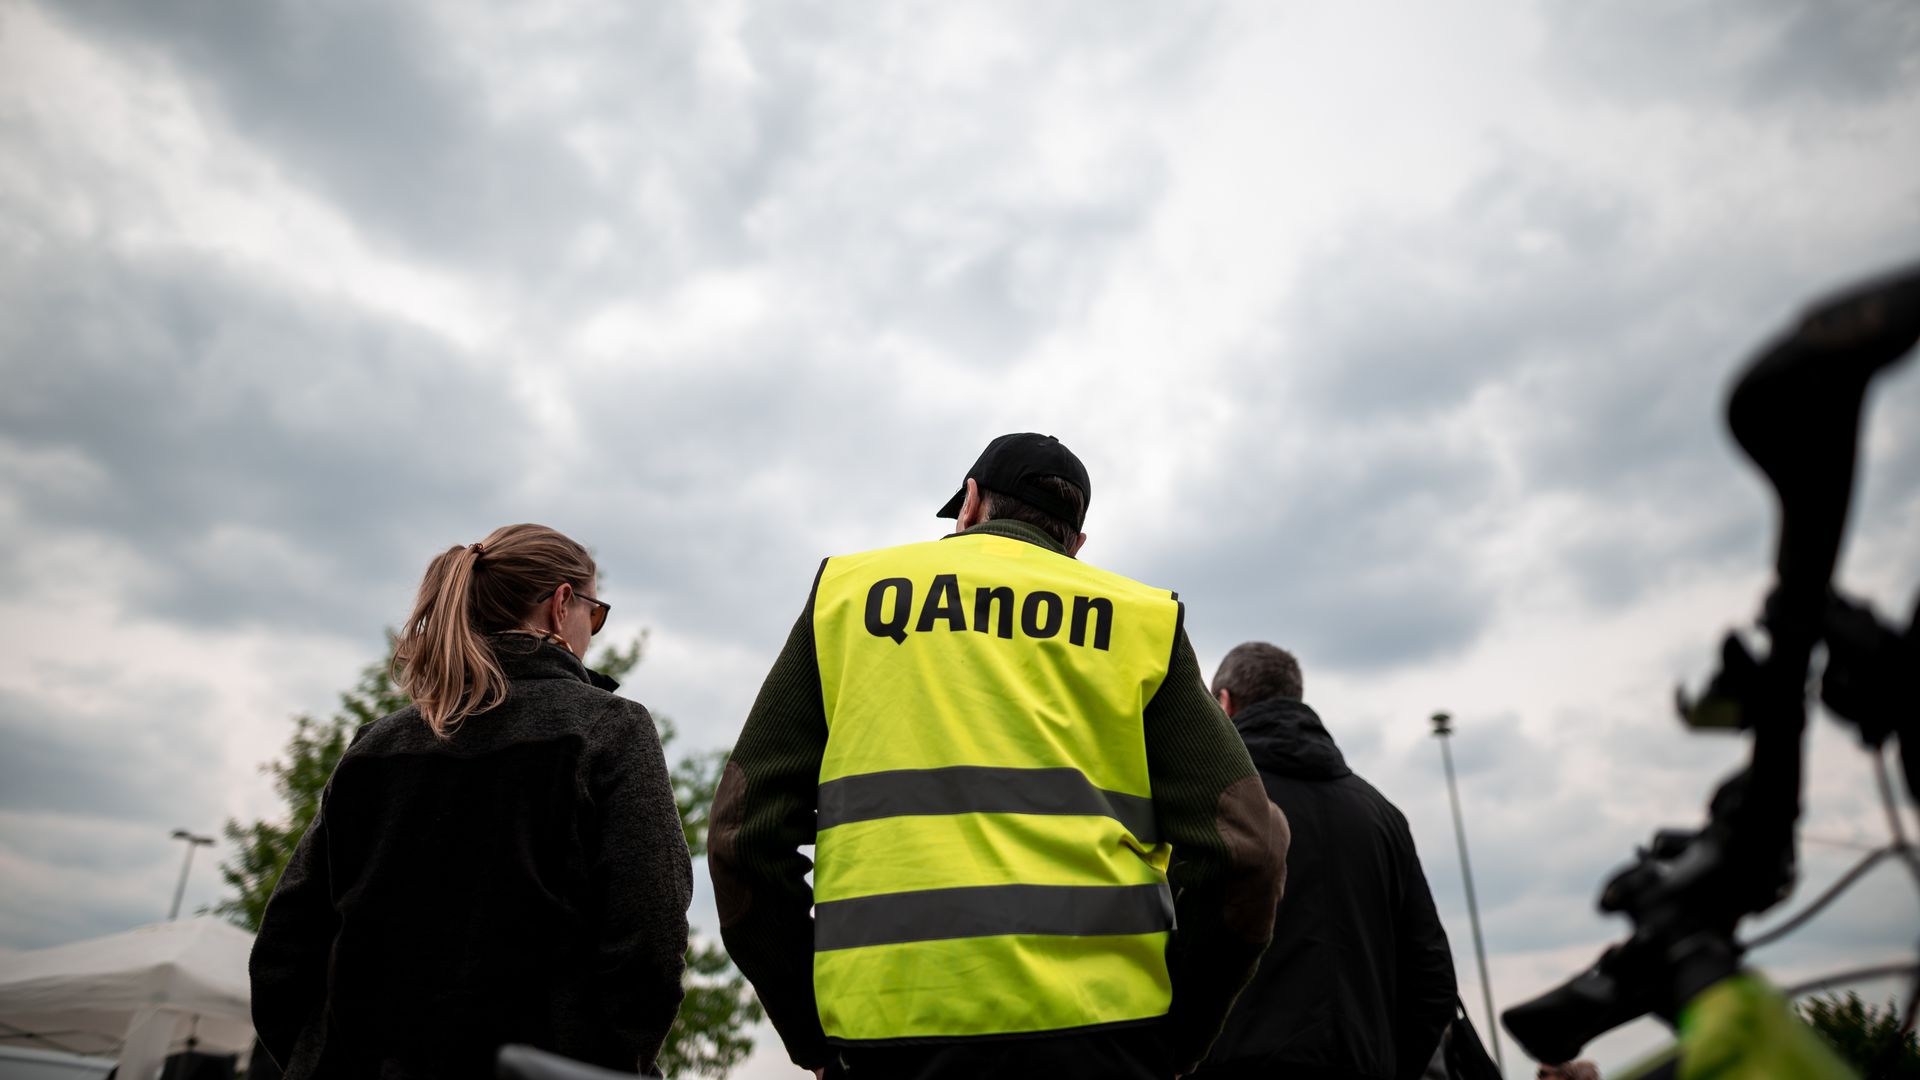 A man wears a bright vest that says "Qanon" while protesting coronavirus measures